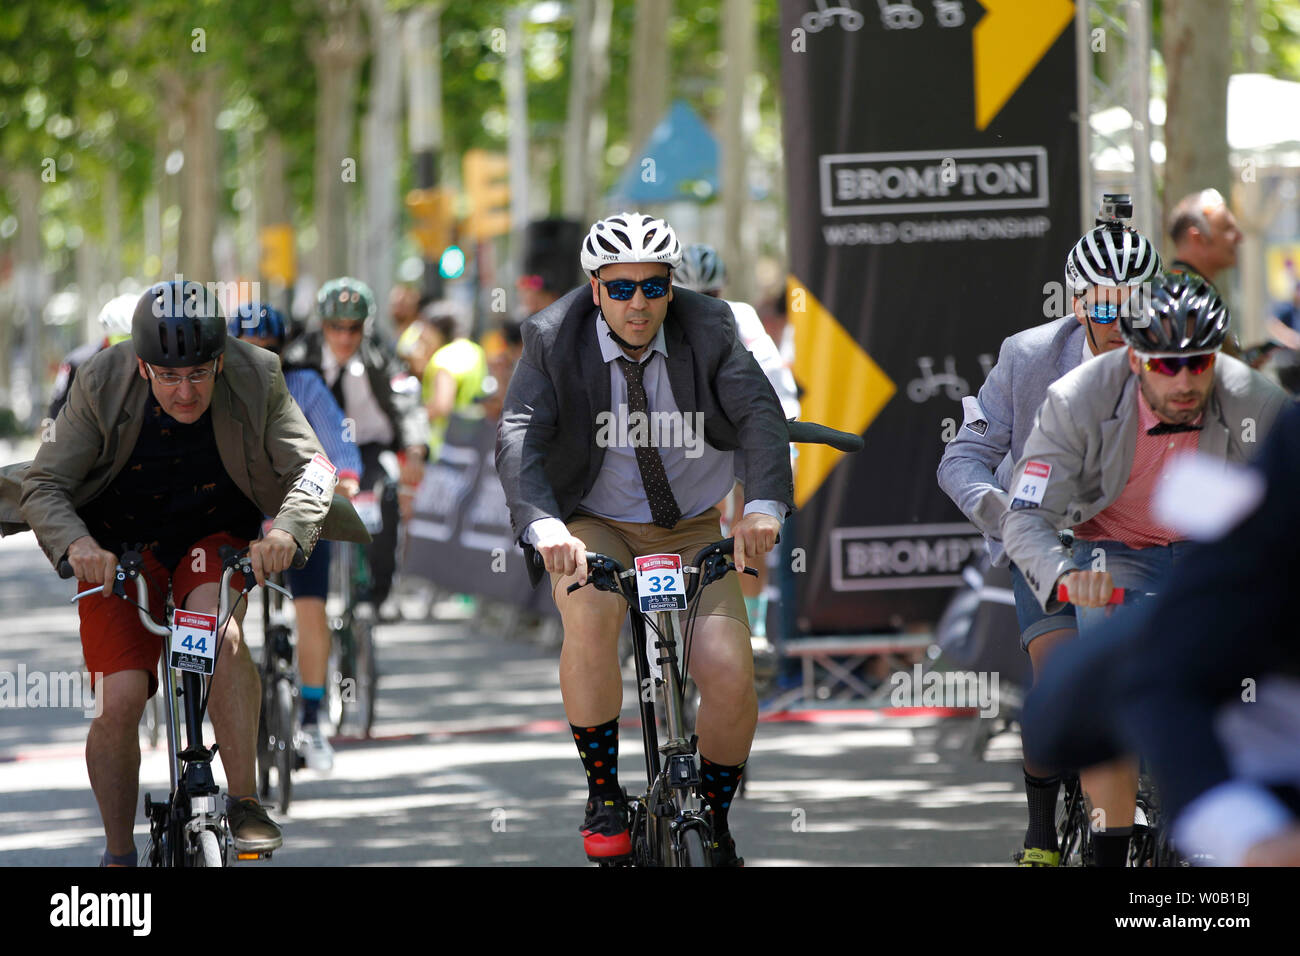 Spanish edition of the 2019 Brompton World Championship for folding bikes with a no lycra rule held during Sea Otter Bike festival in Girona, Spain Stock Photo